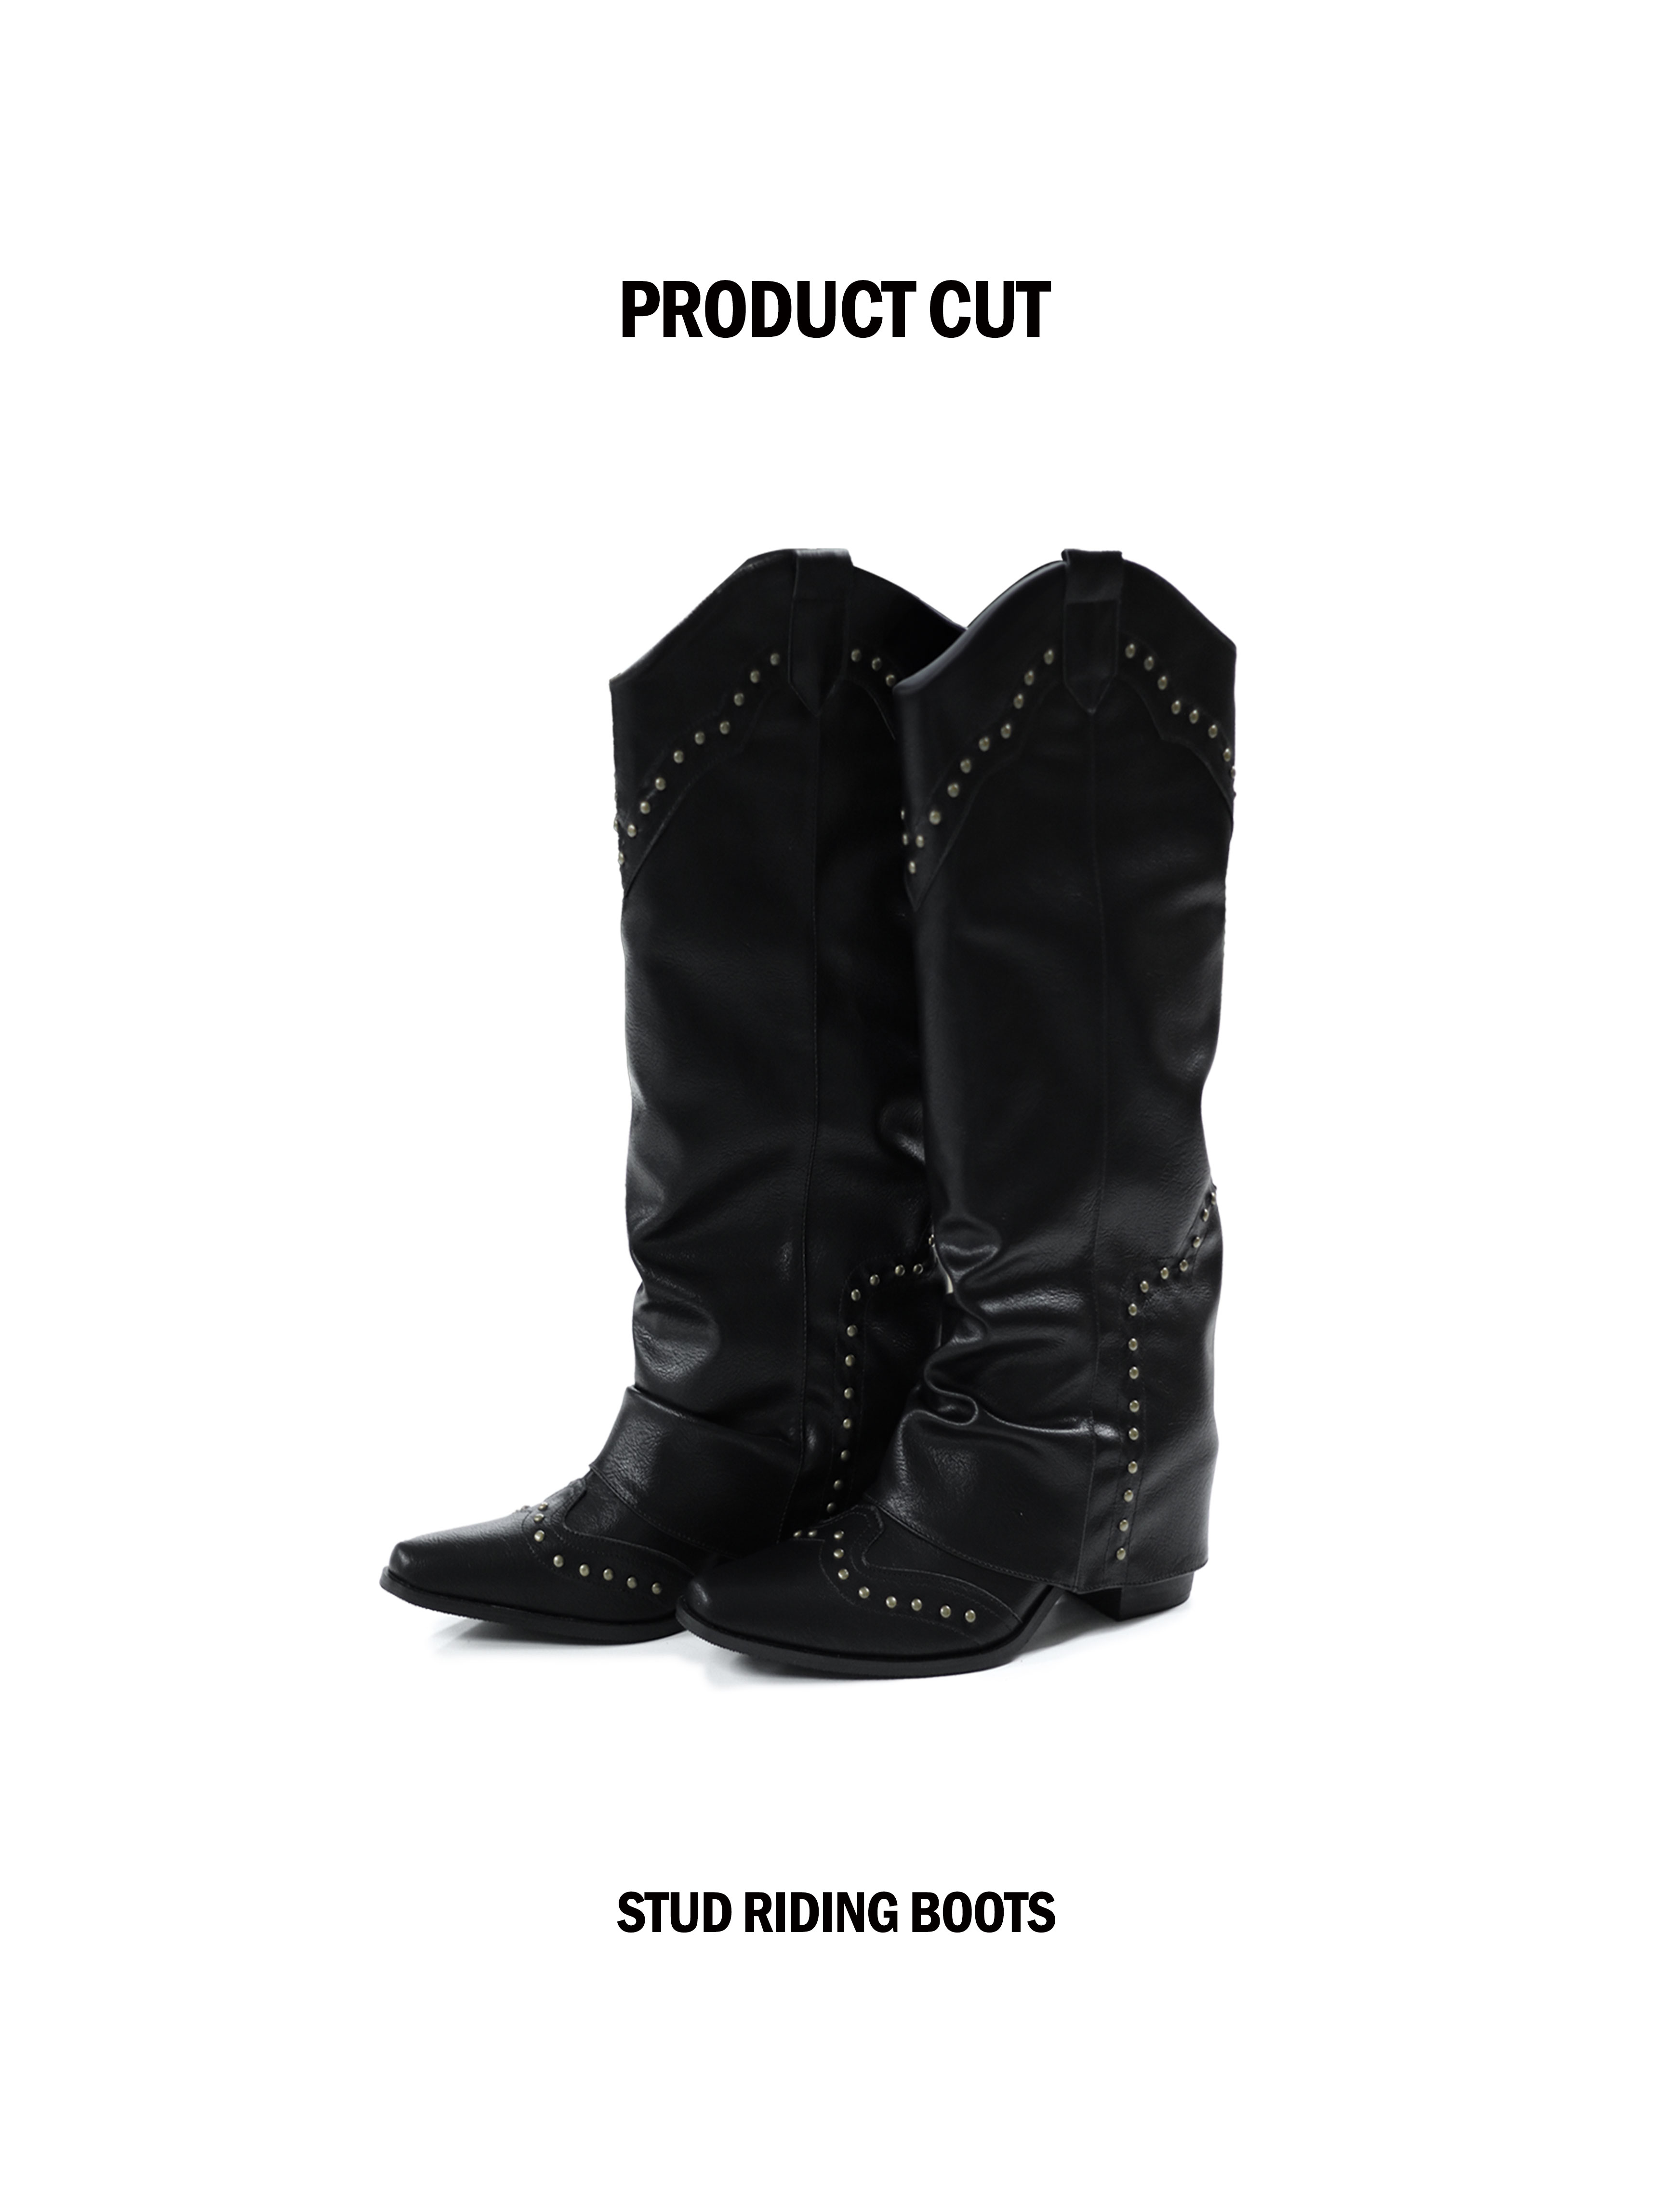 Stud riding boots